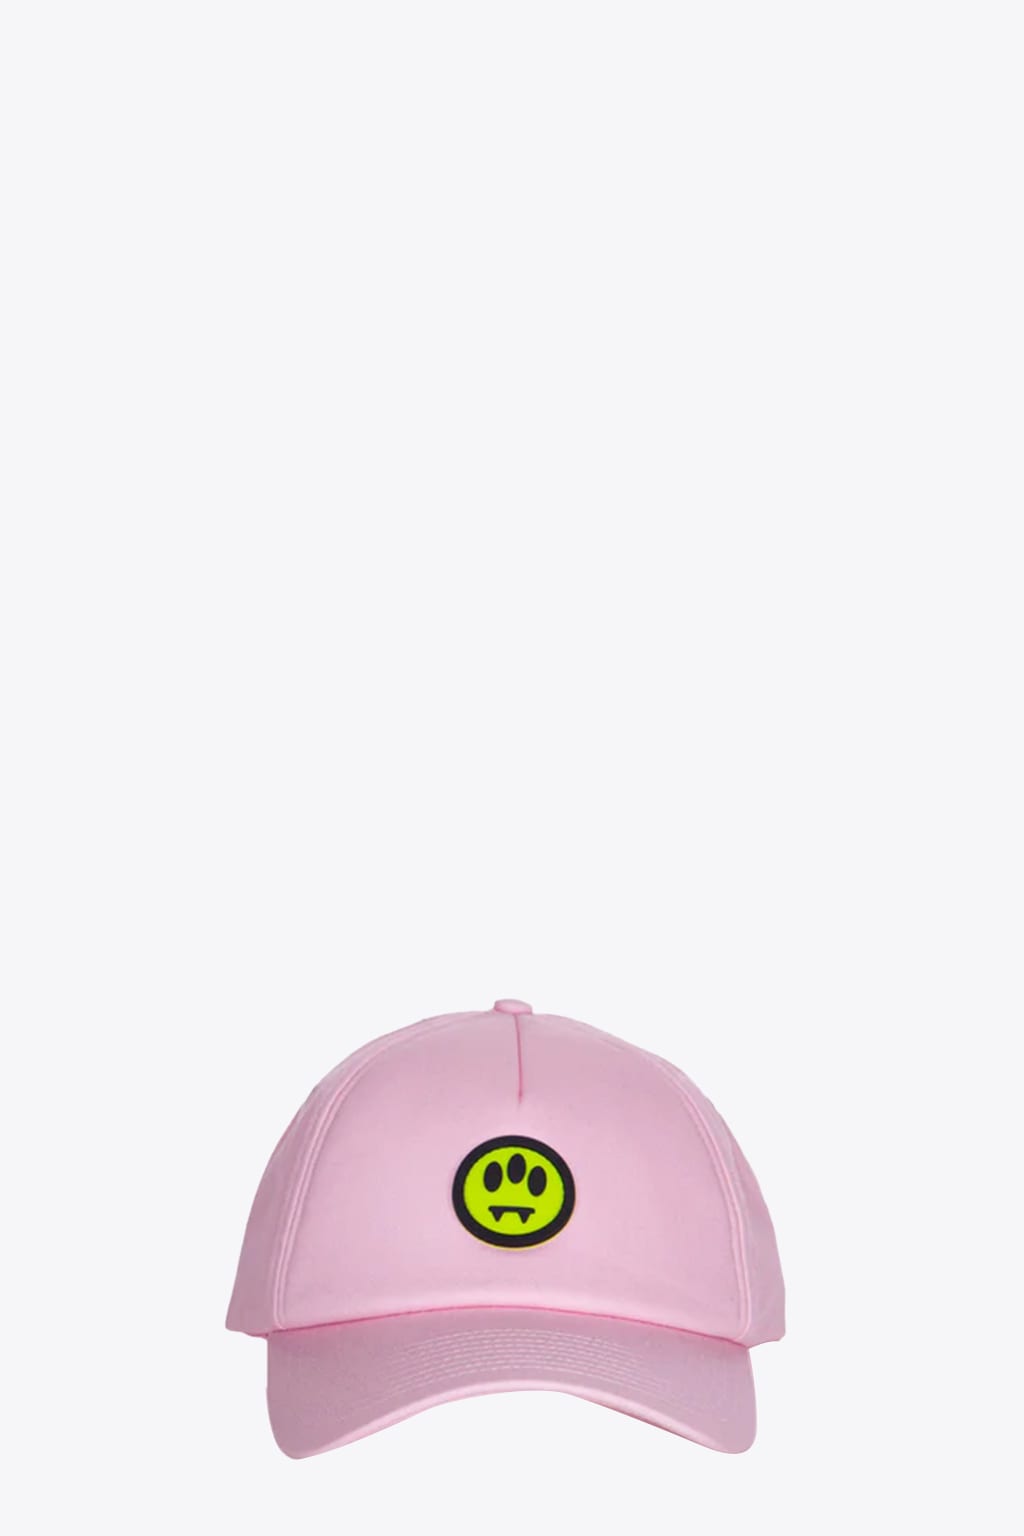 Barrow Cap Baseball Unisex Pink cotton cap with smile patch.